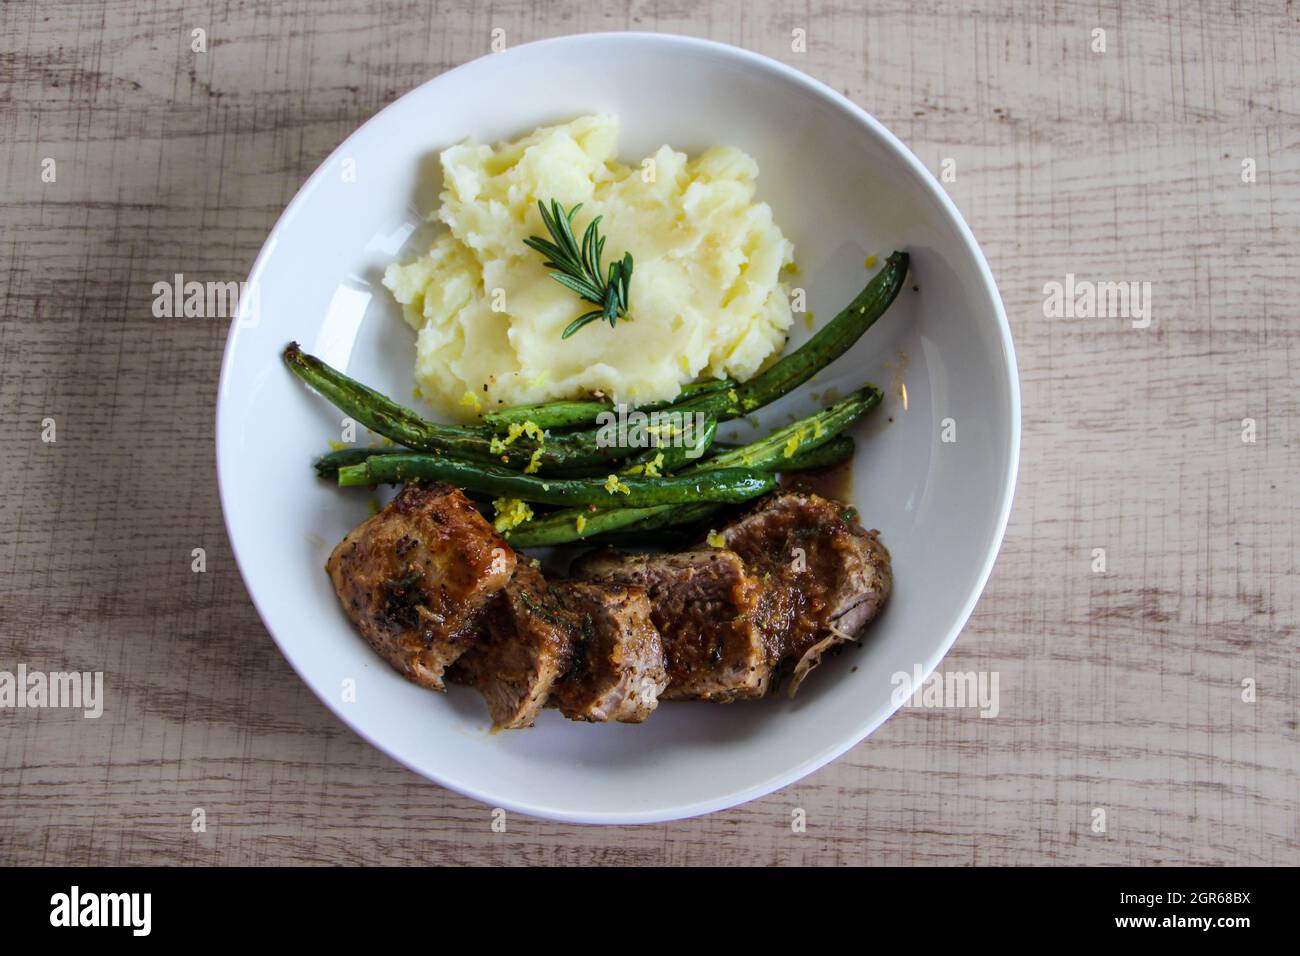 Comfort Food Mashed Potatoes Green Beans And Pork Chop Stock Photo